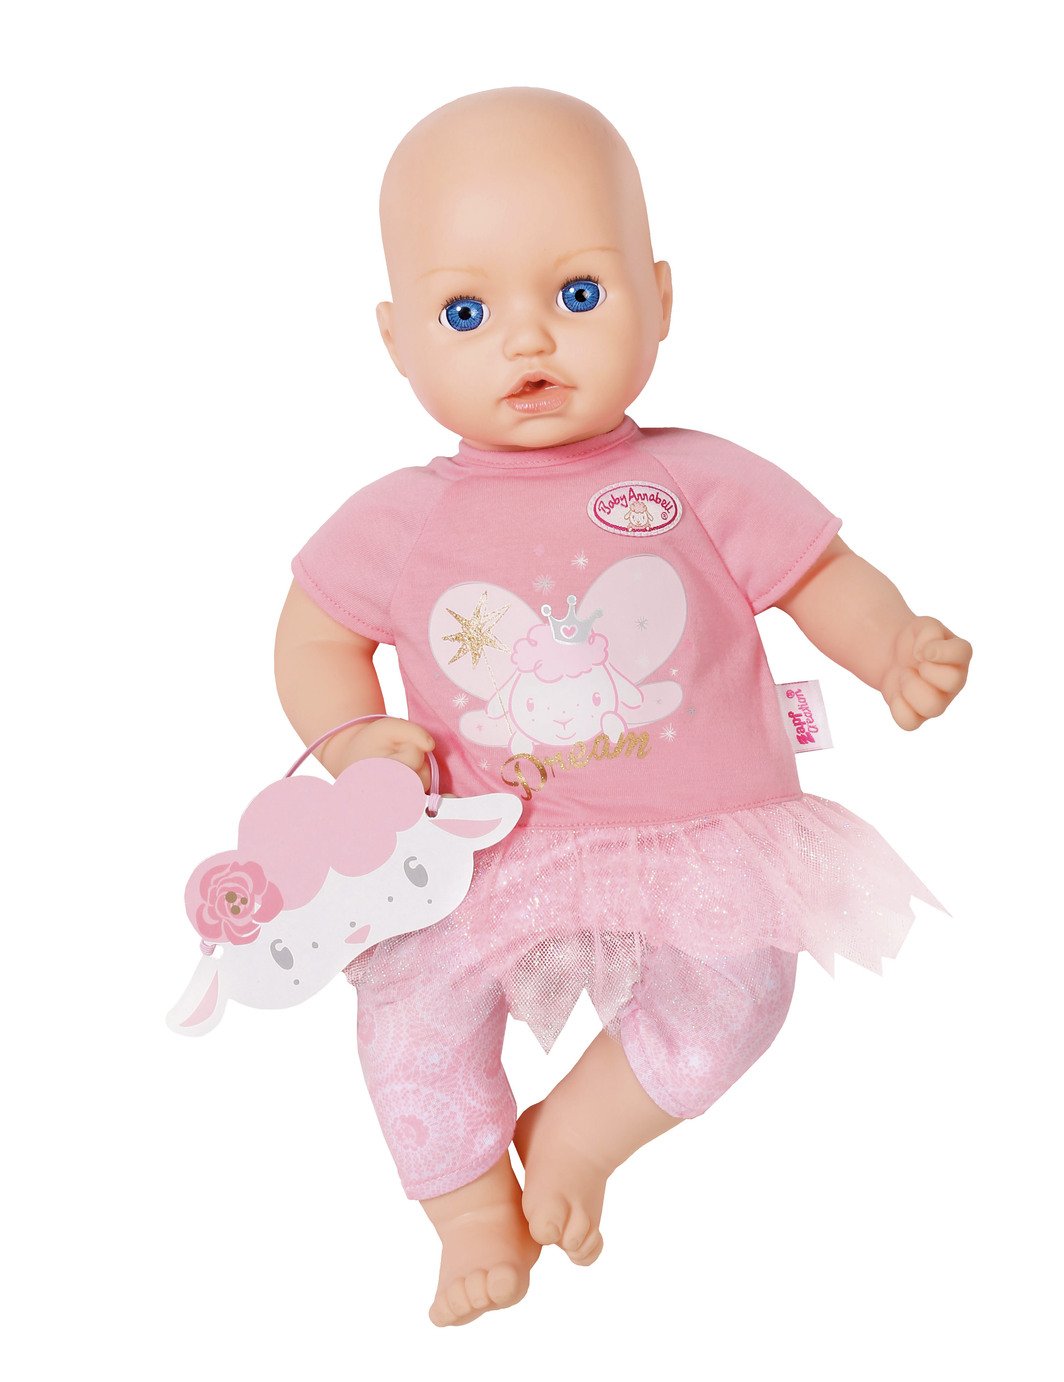 Baby Annabell Sweet Dreams Fairy Outfit Review